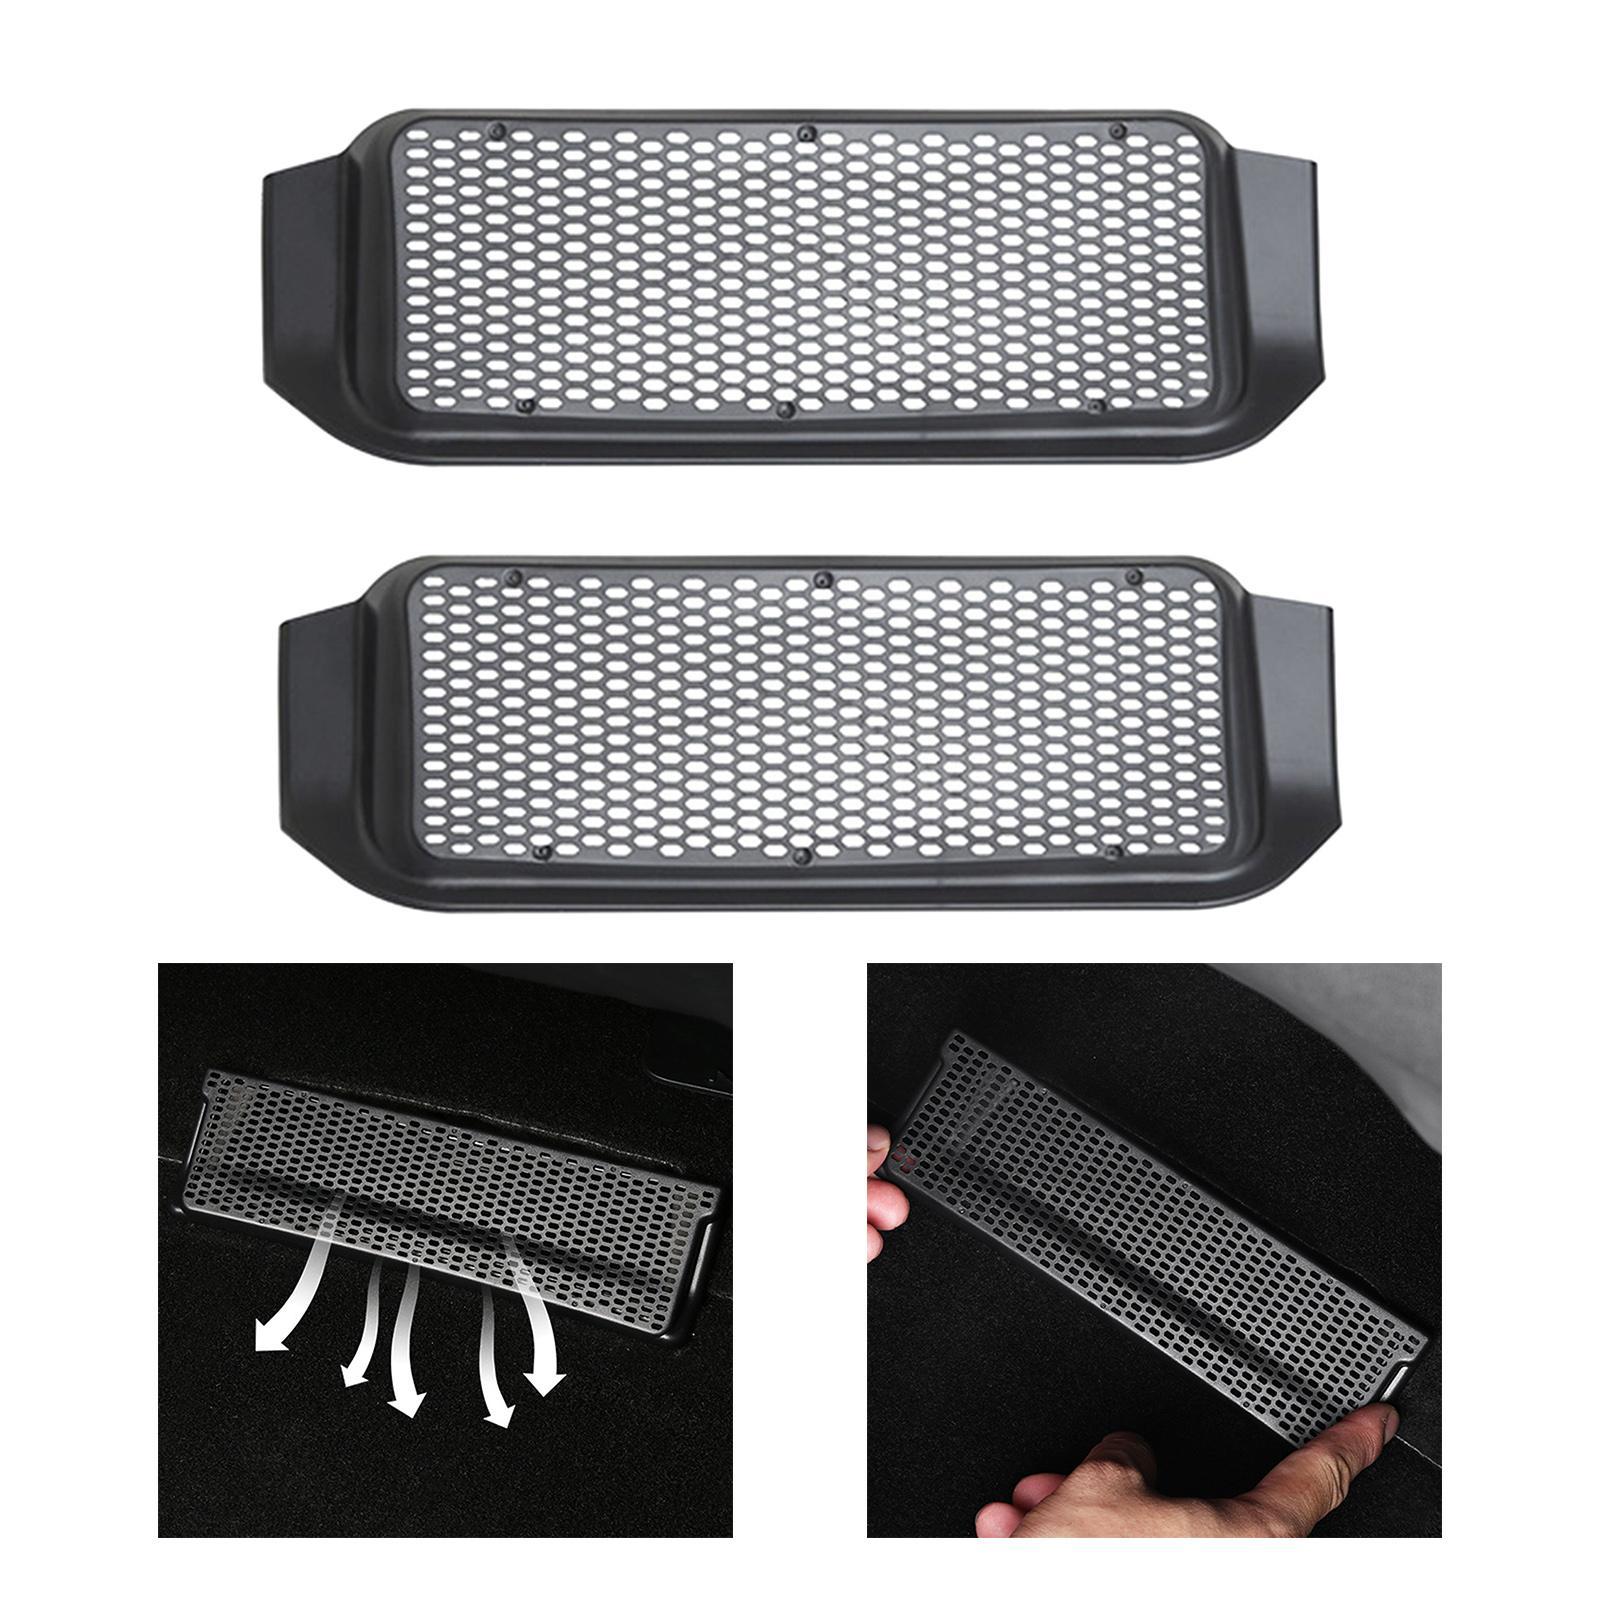 Car Air Outlet Cover under Seat Air Outlet Vent Cover Keep Air Flow and Clean under Seat Air Vent Dustproof Cover for